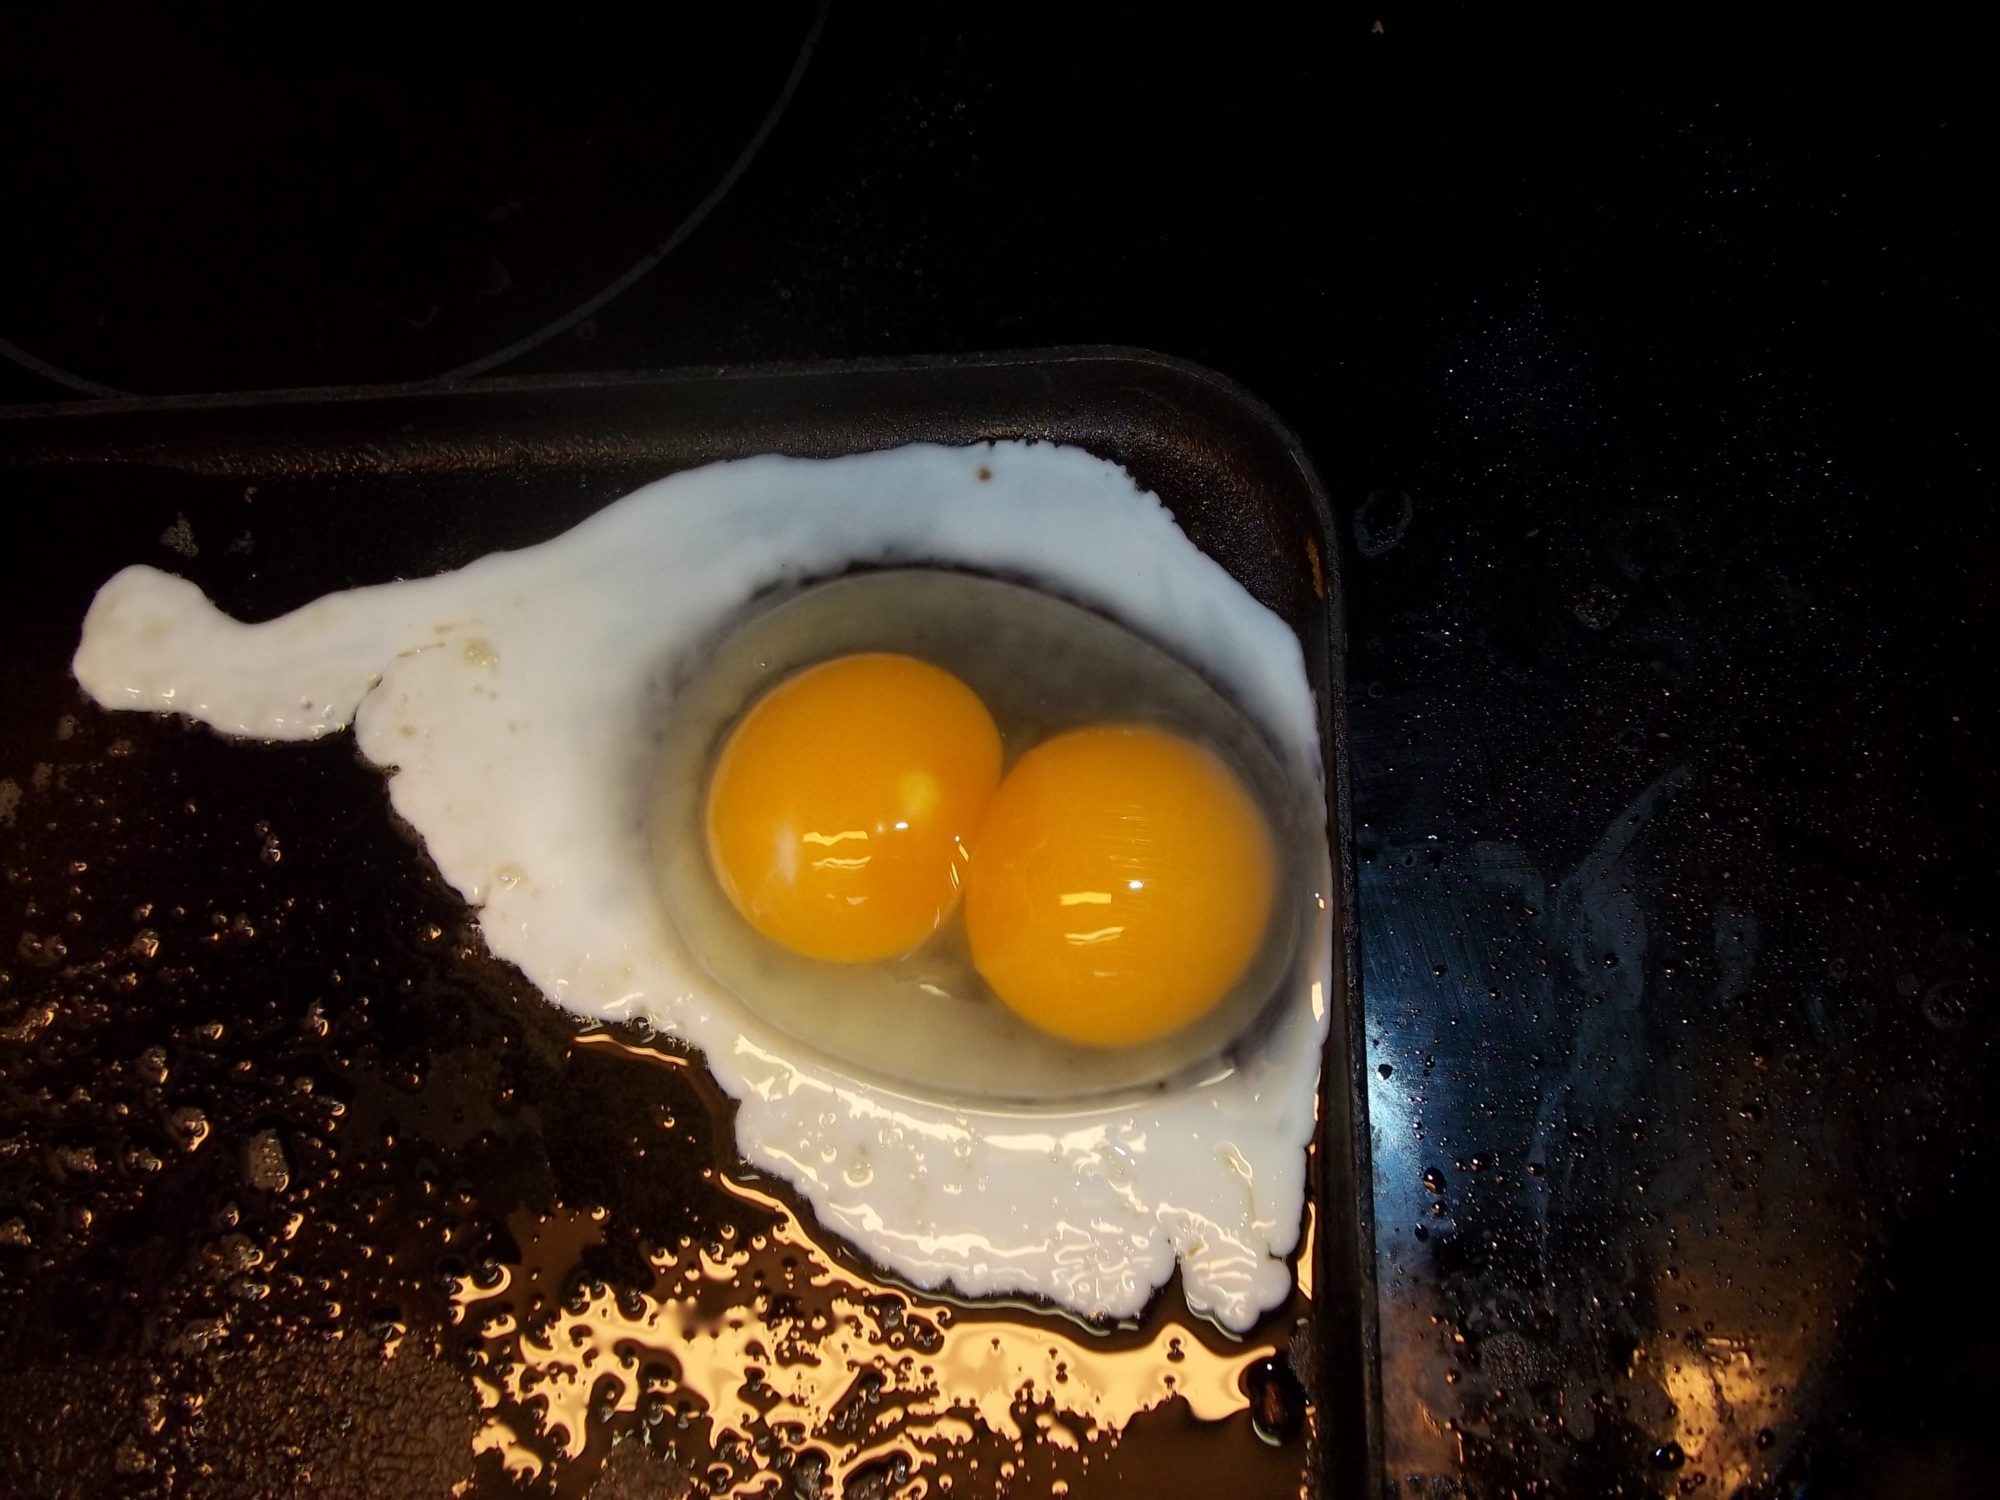 The big egg was a Double-yolker!